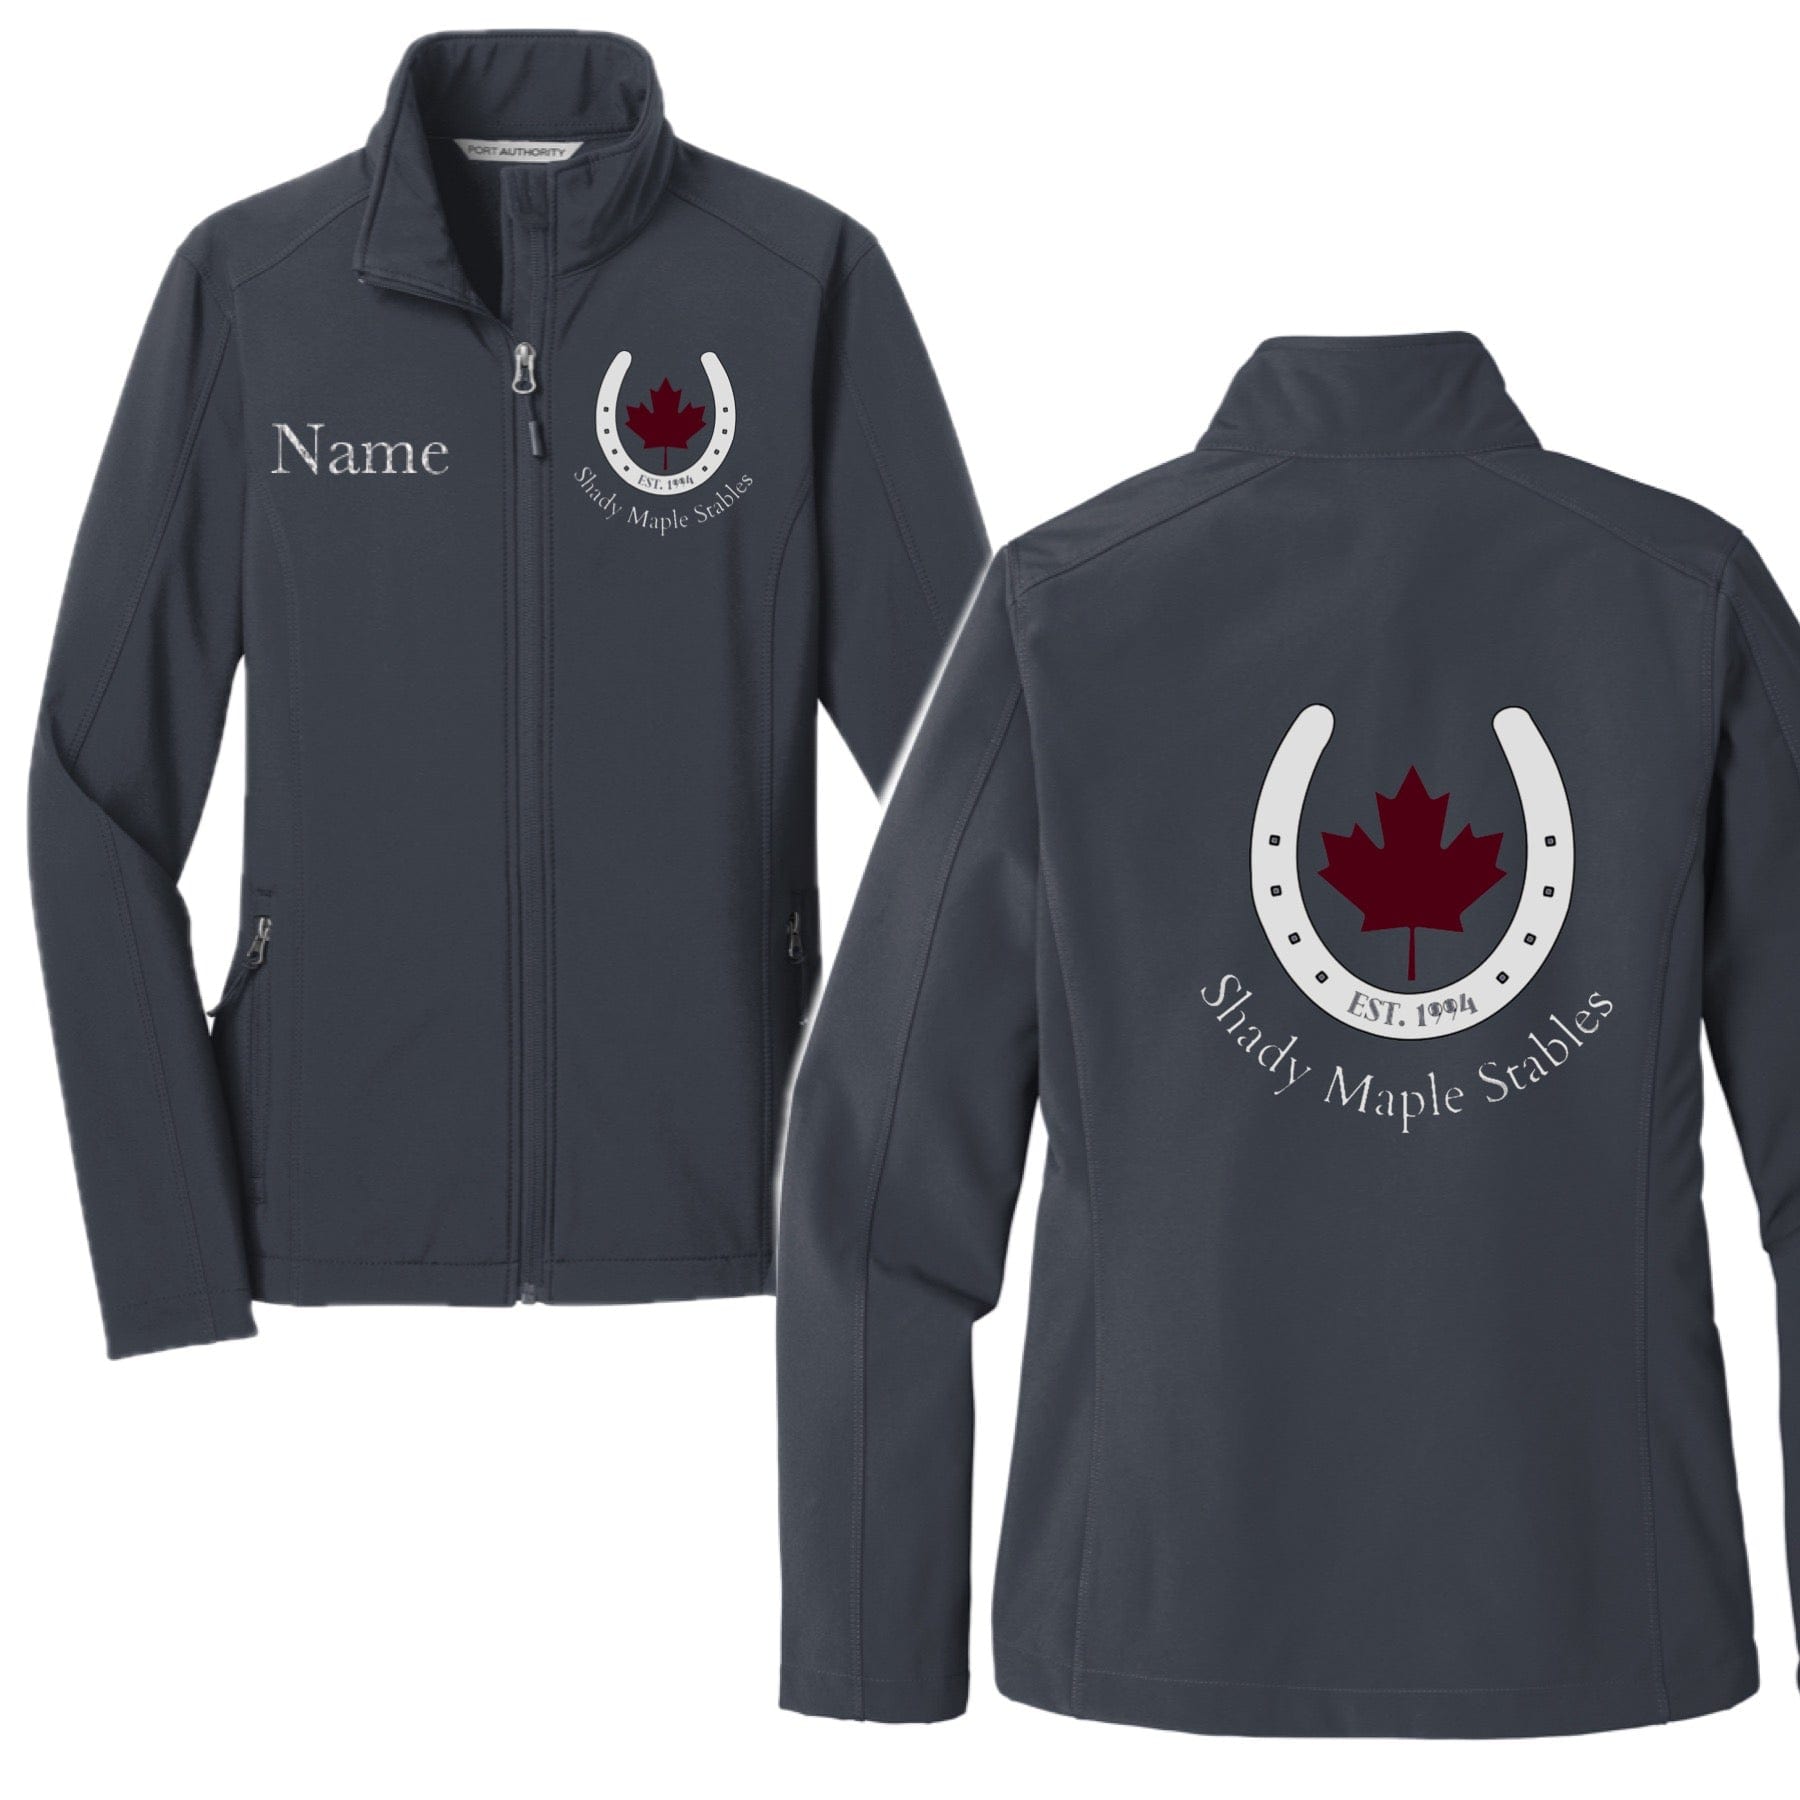 Equestrian Team Apparel Shady Maple Stables Shell Jacket equestrian team apparel online tack store mobile tack store custom farm apparel custom show stable clothing equestrian lifestyle horse show clothing riding clothes horses equestrian tack store